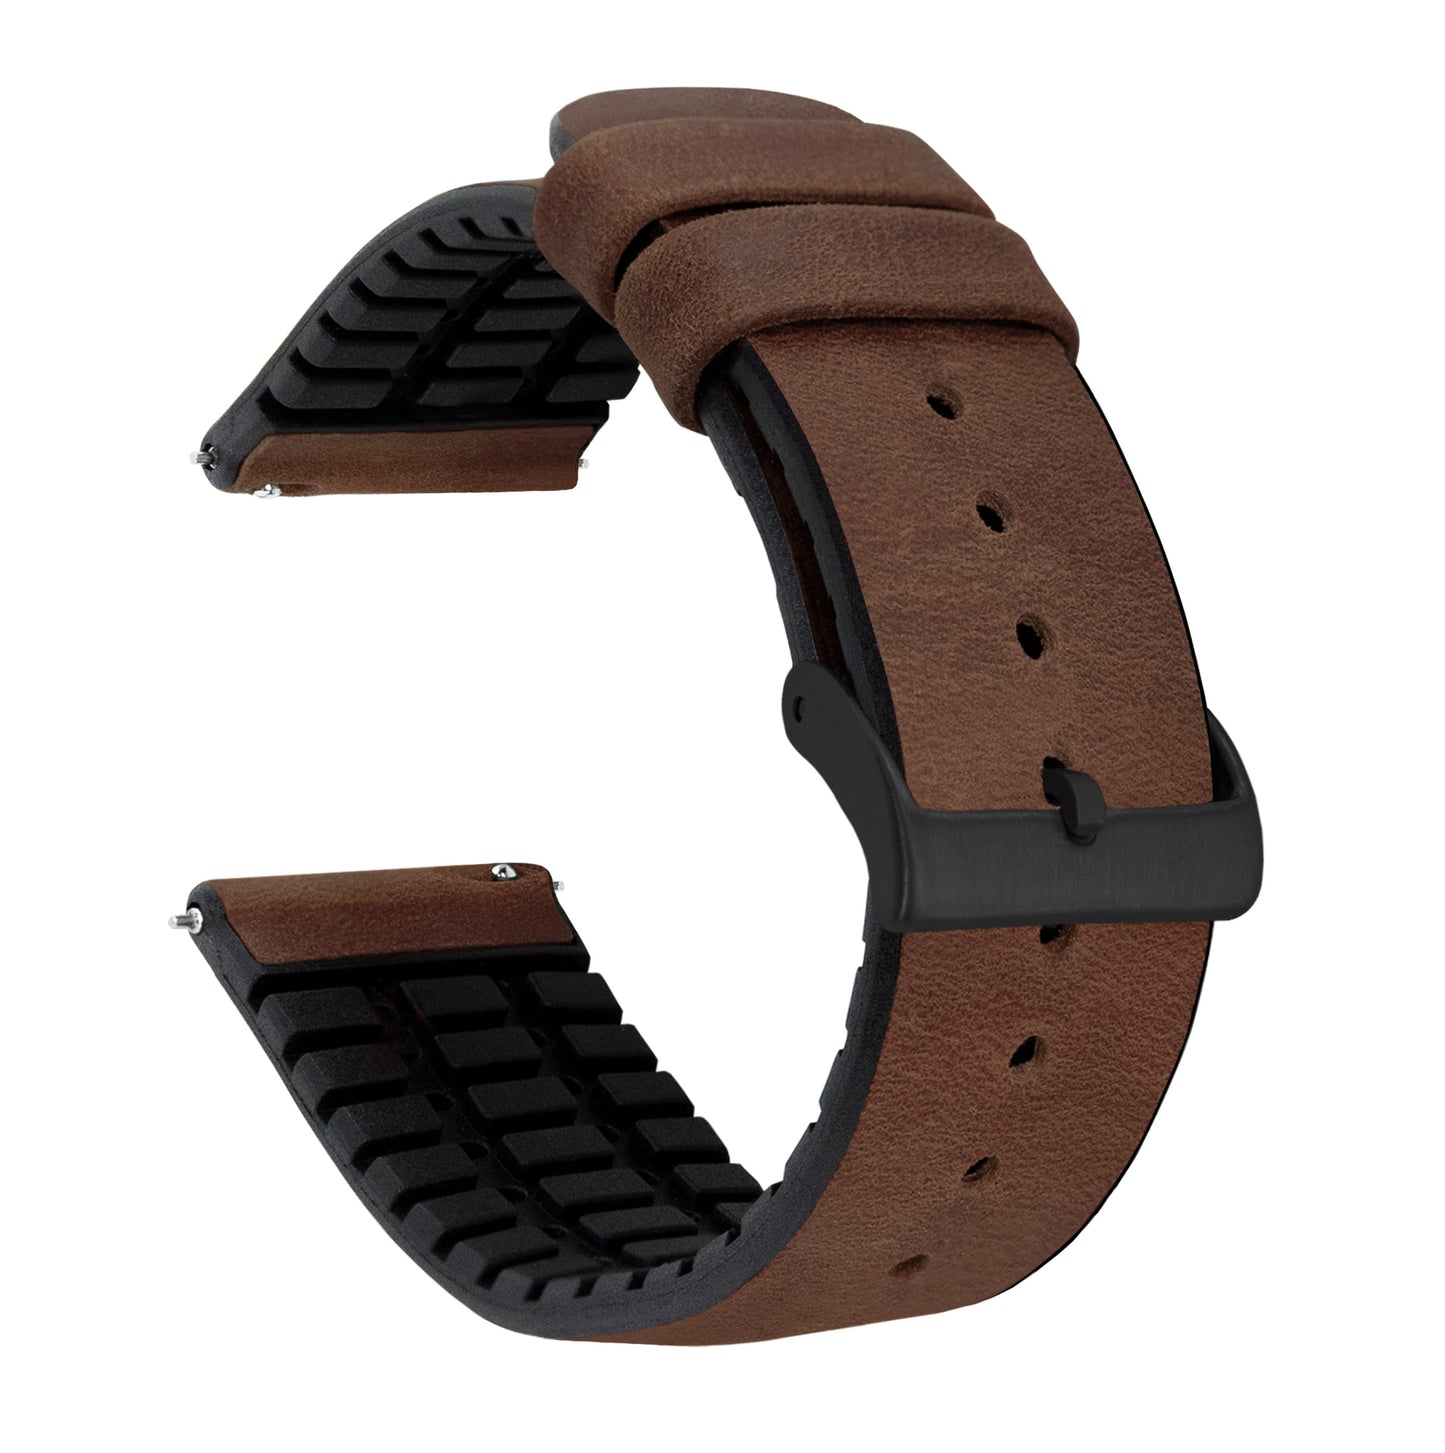 Walnut Brown Leather and Rubber Hybrid - Barton Watch Bands